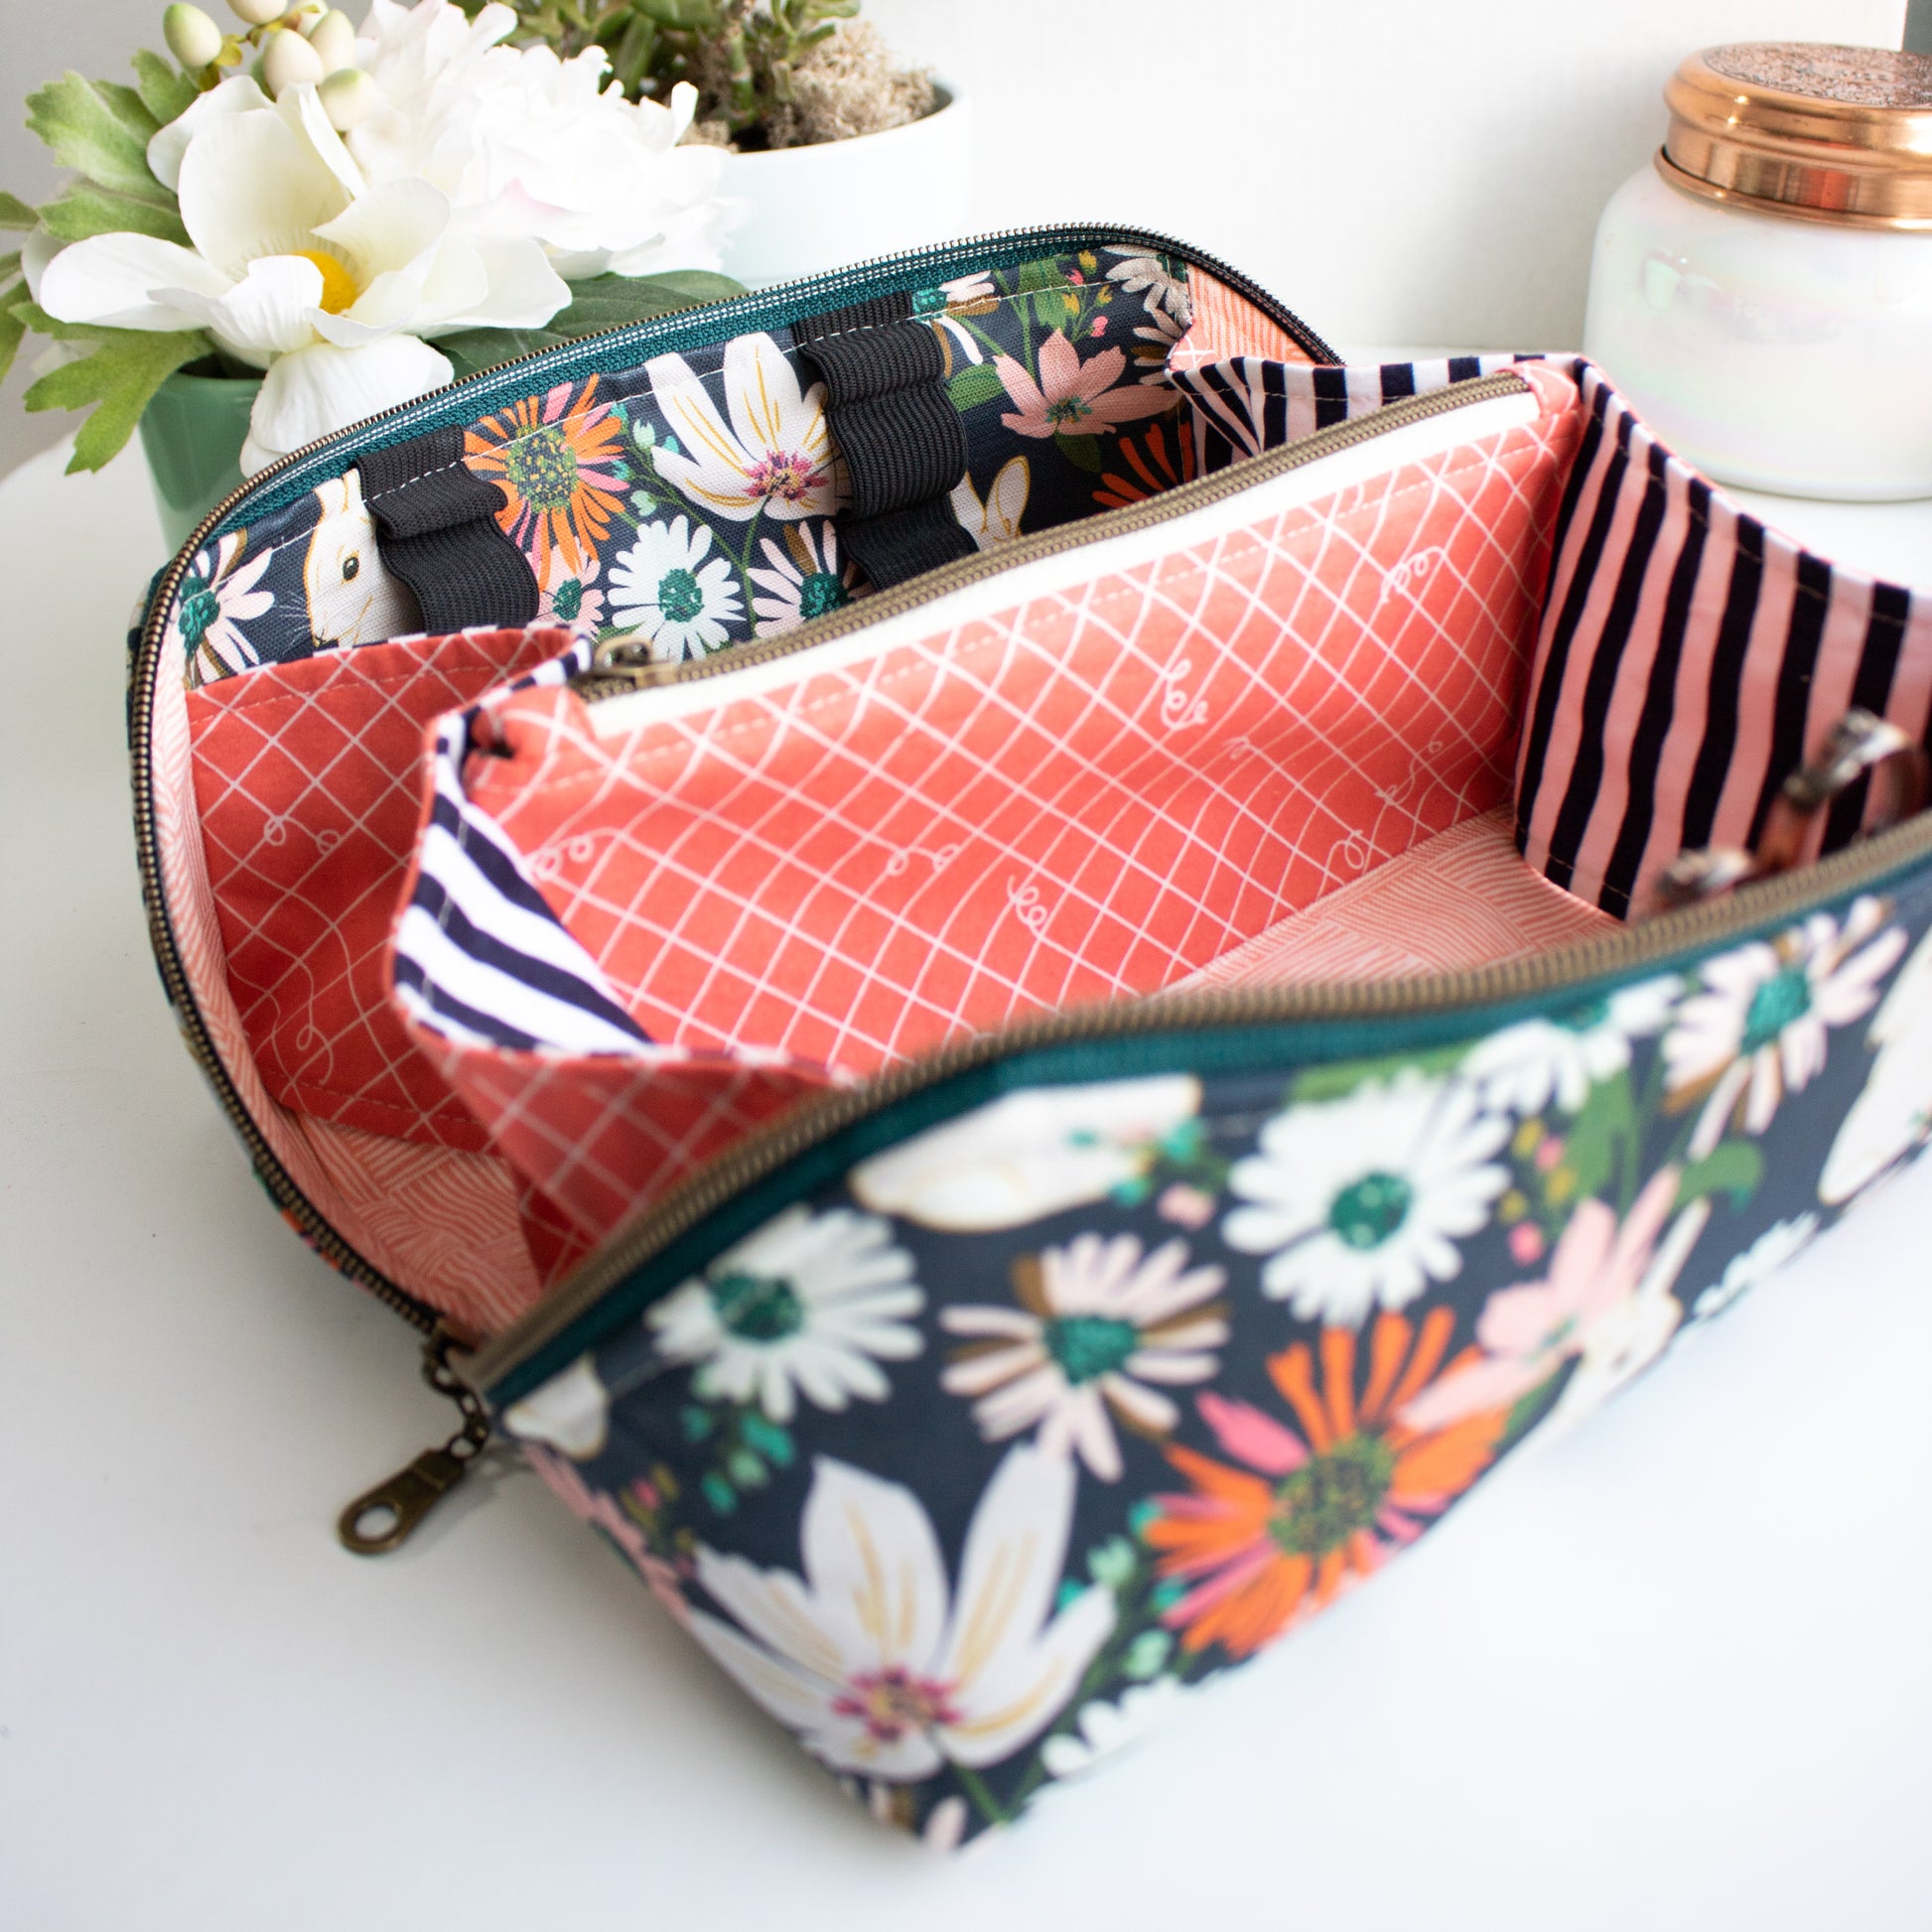 How to sew a simple zipper pouch with free tutorial - Ameroonie Designs